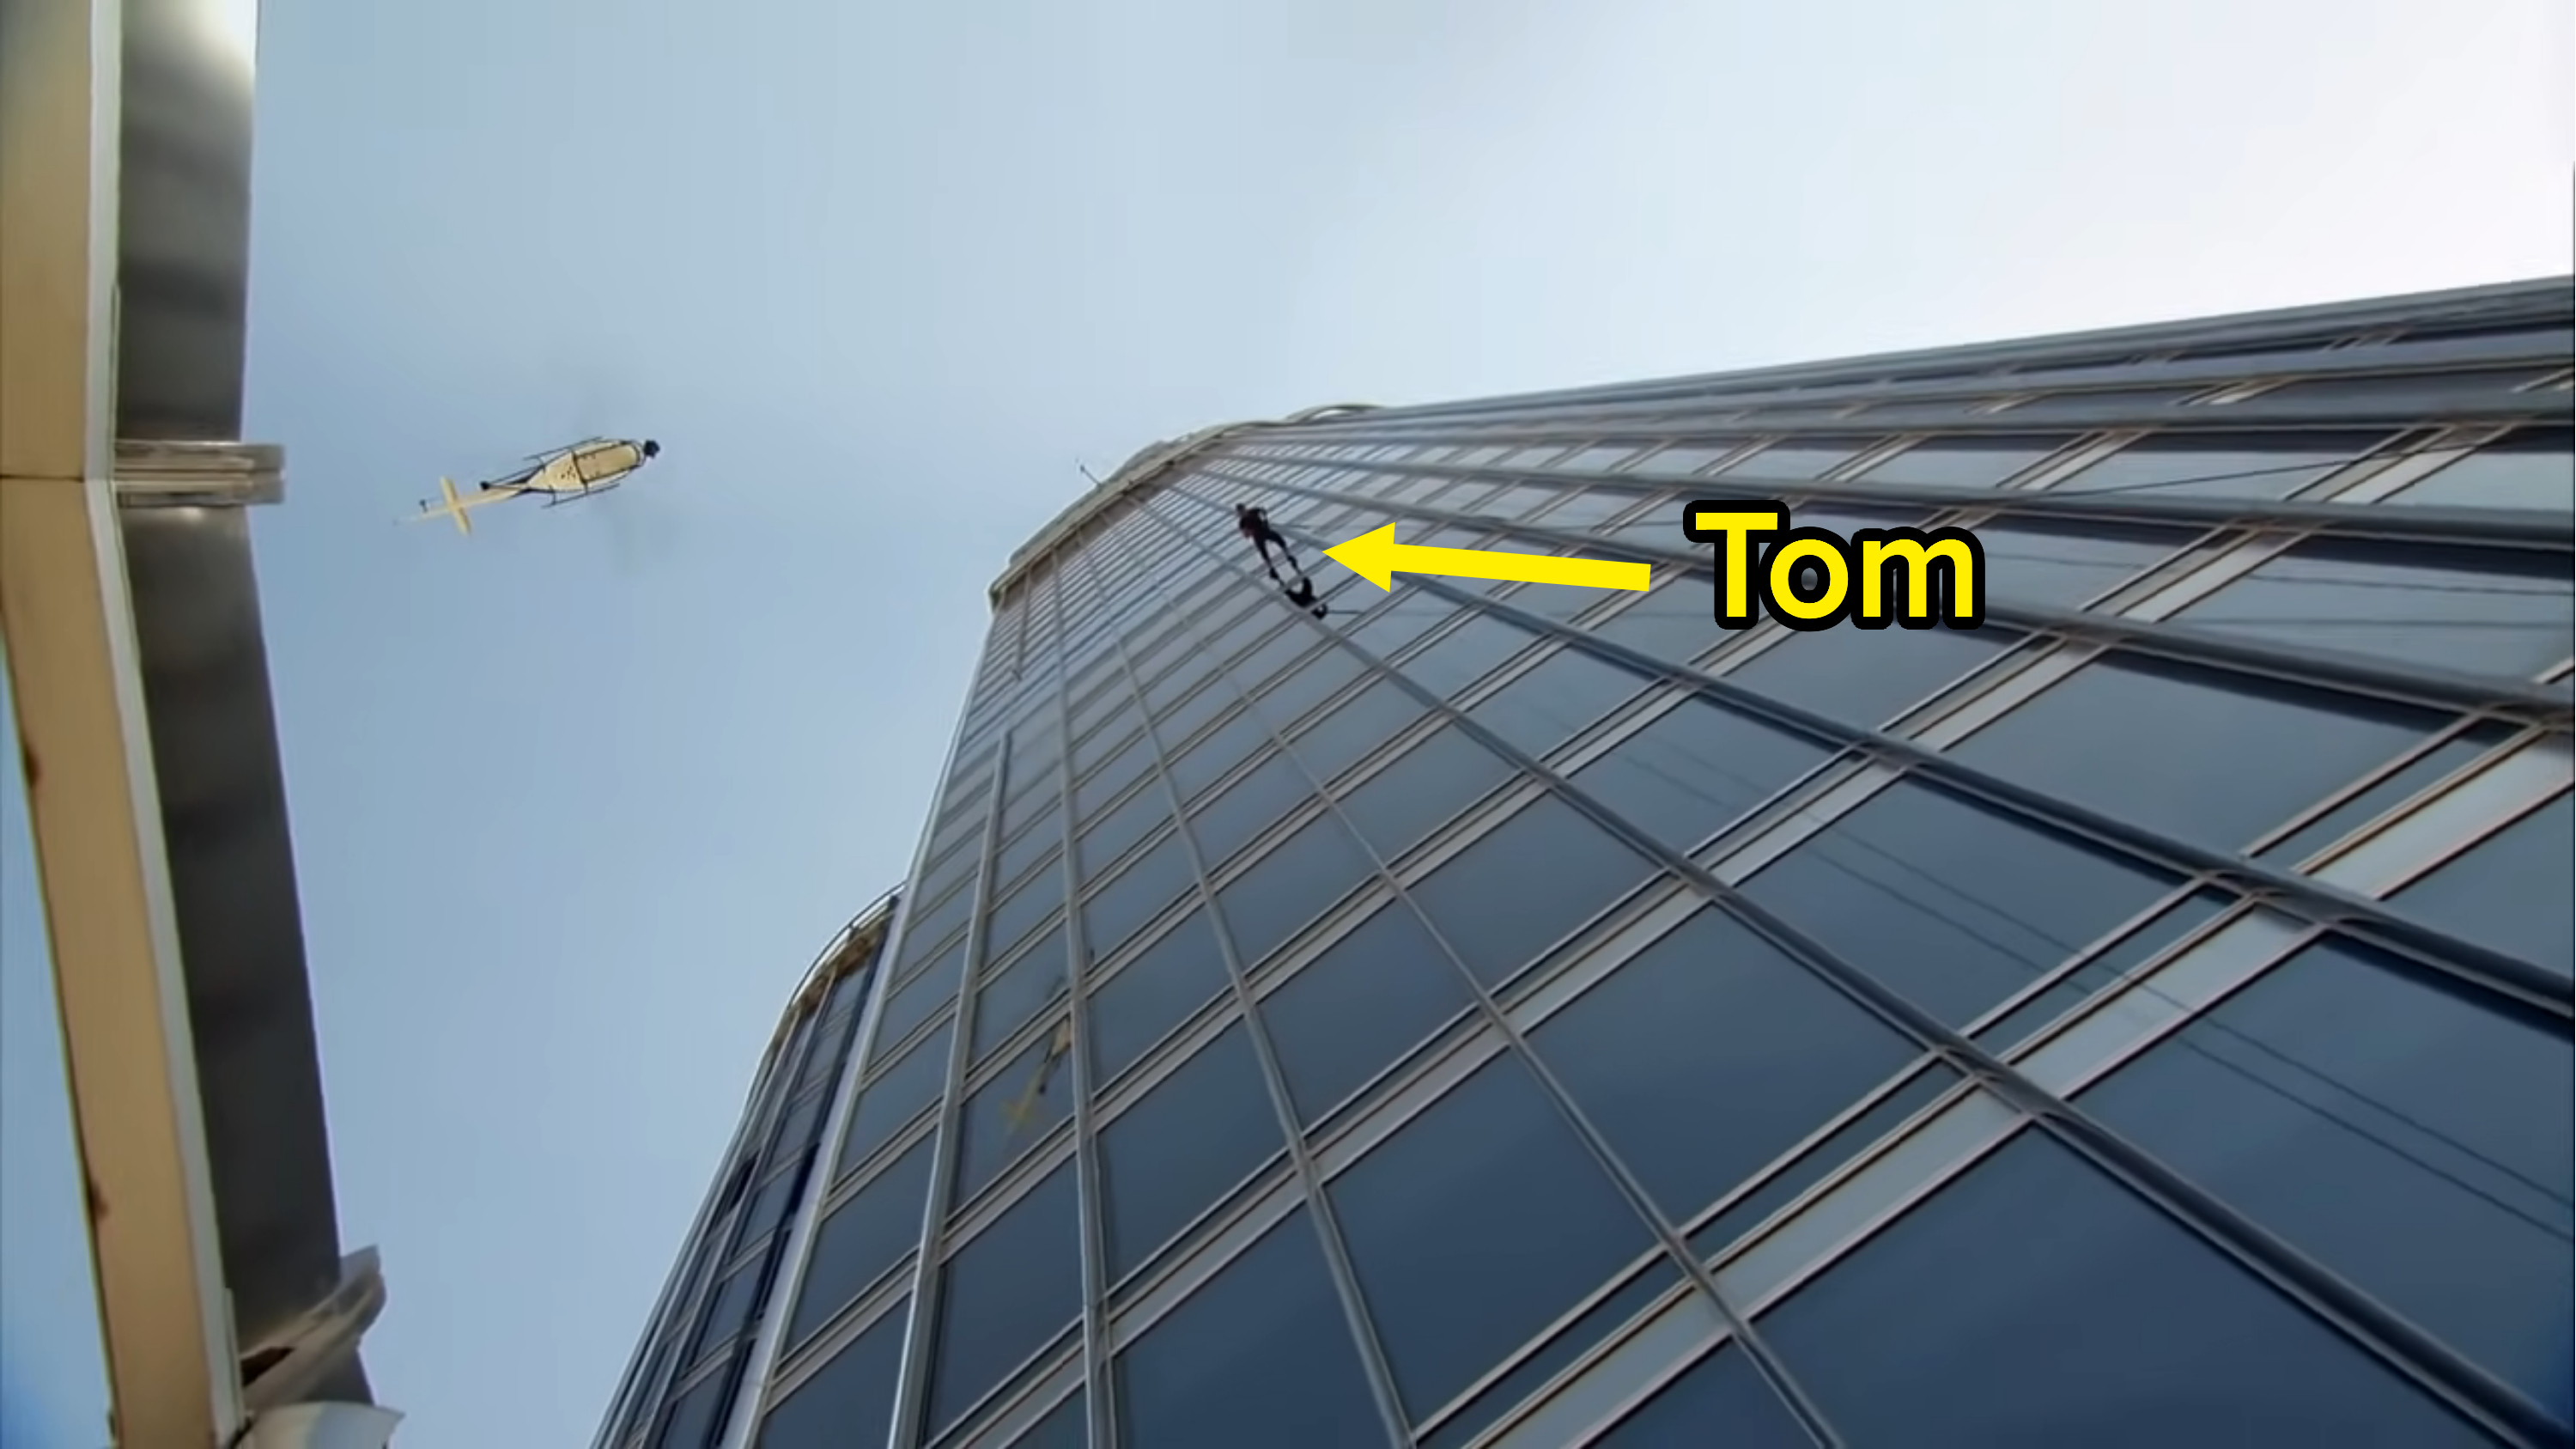 Tom on the side of the building, seen from the bottom